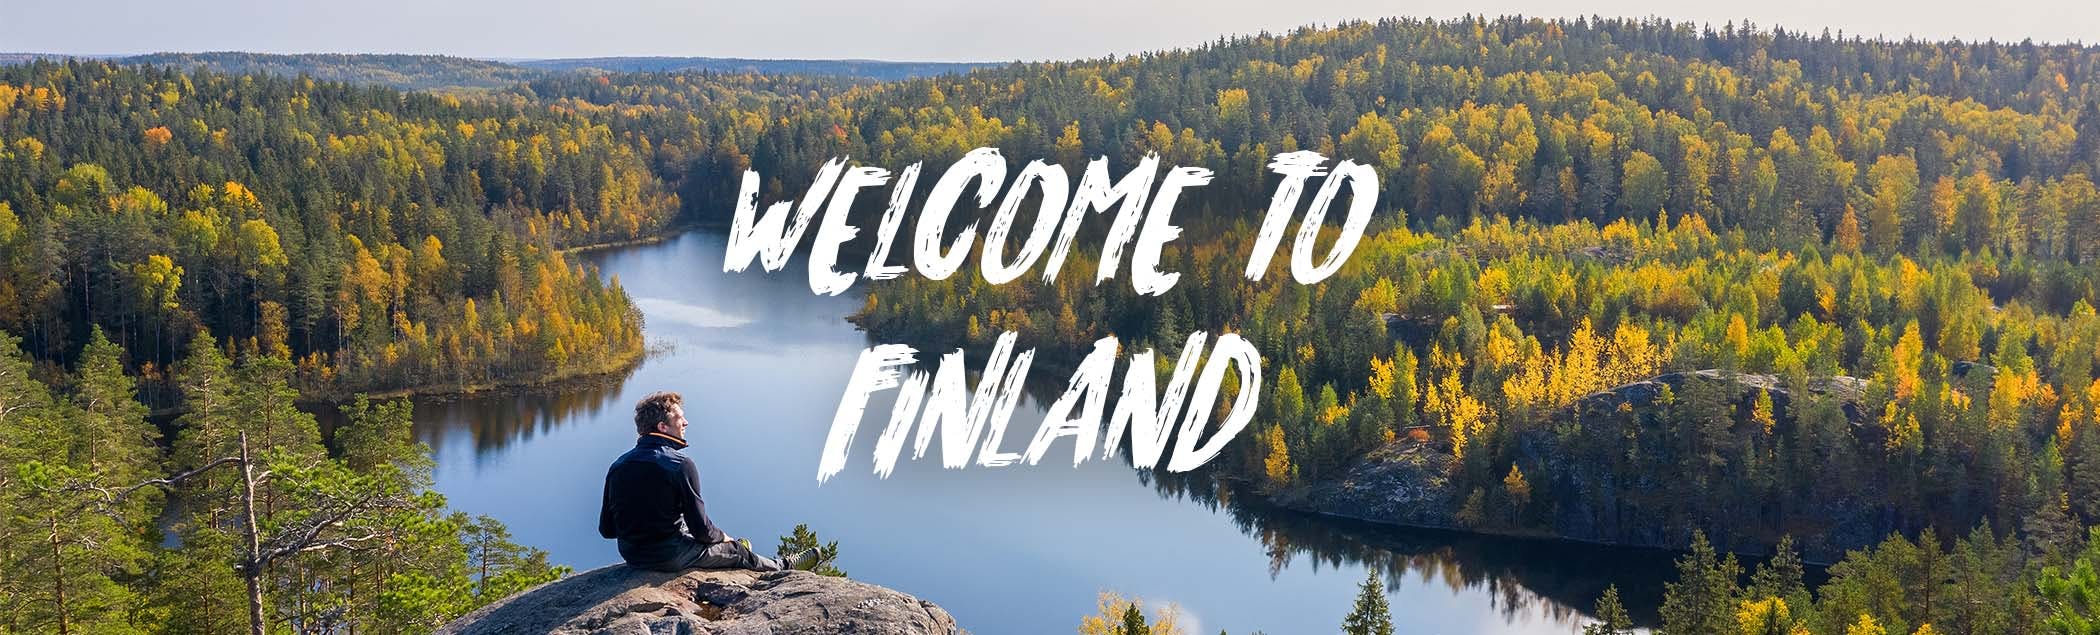 Welcome to work and live in Finland!